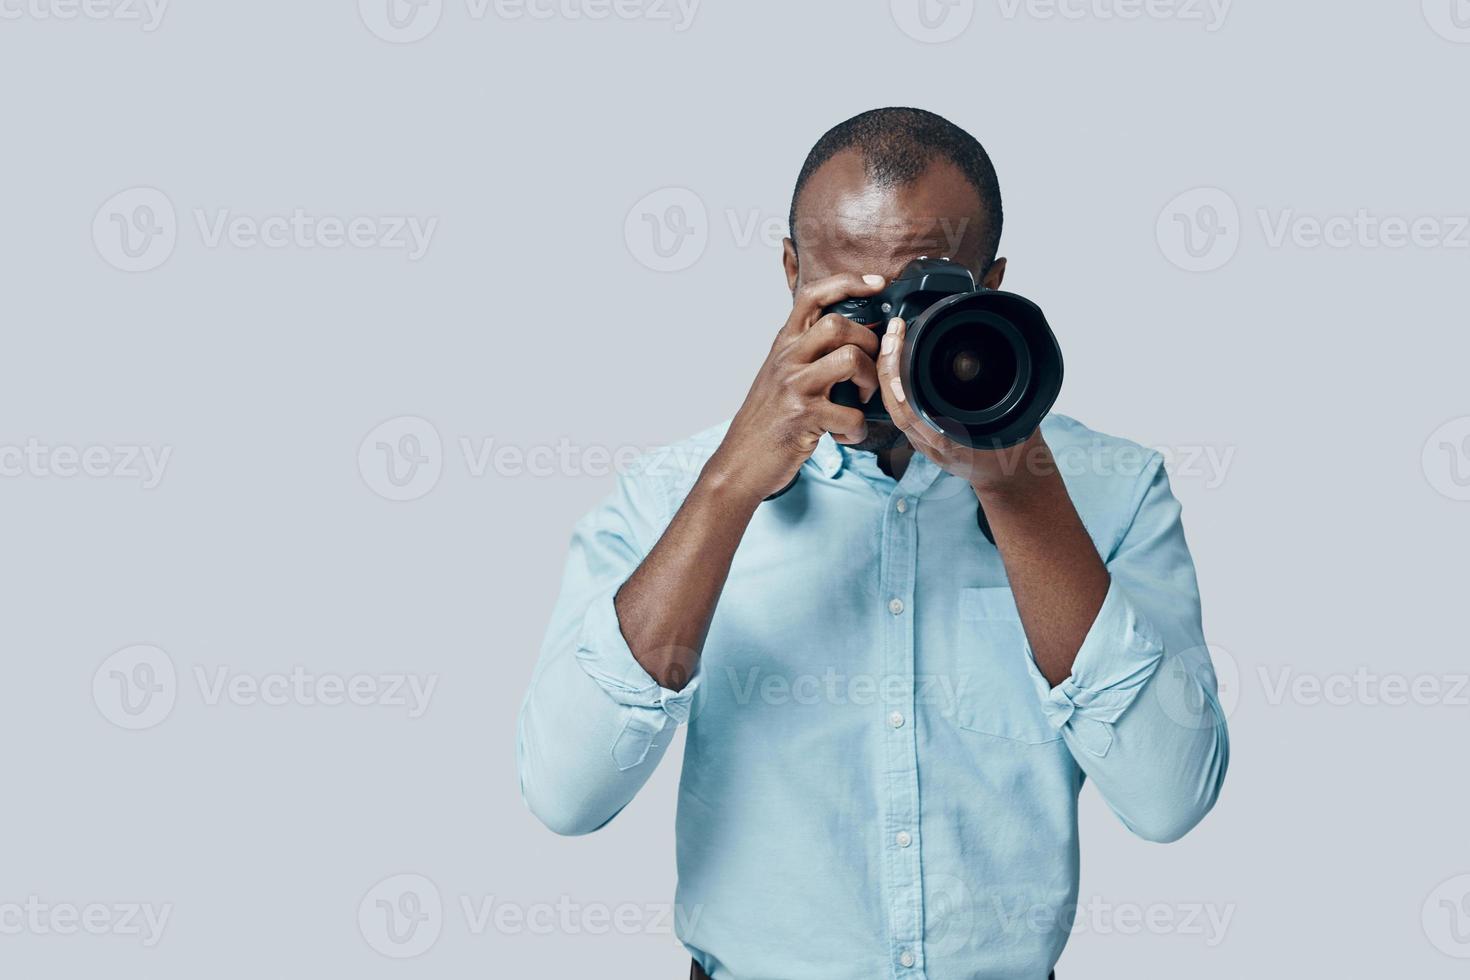 Charming young African man taking a photo using digital camera while standing against grey background